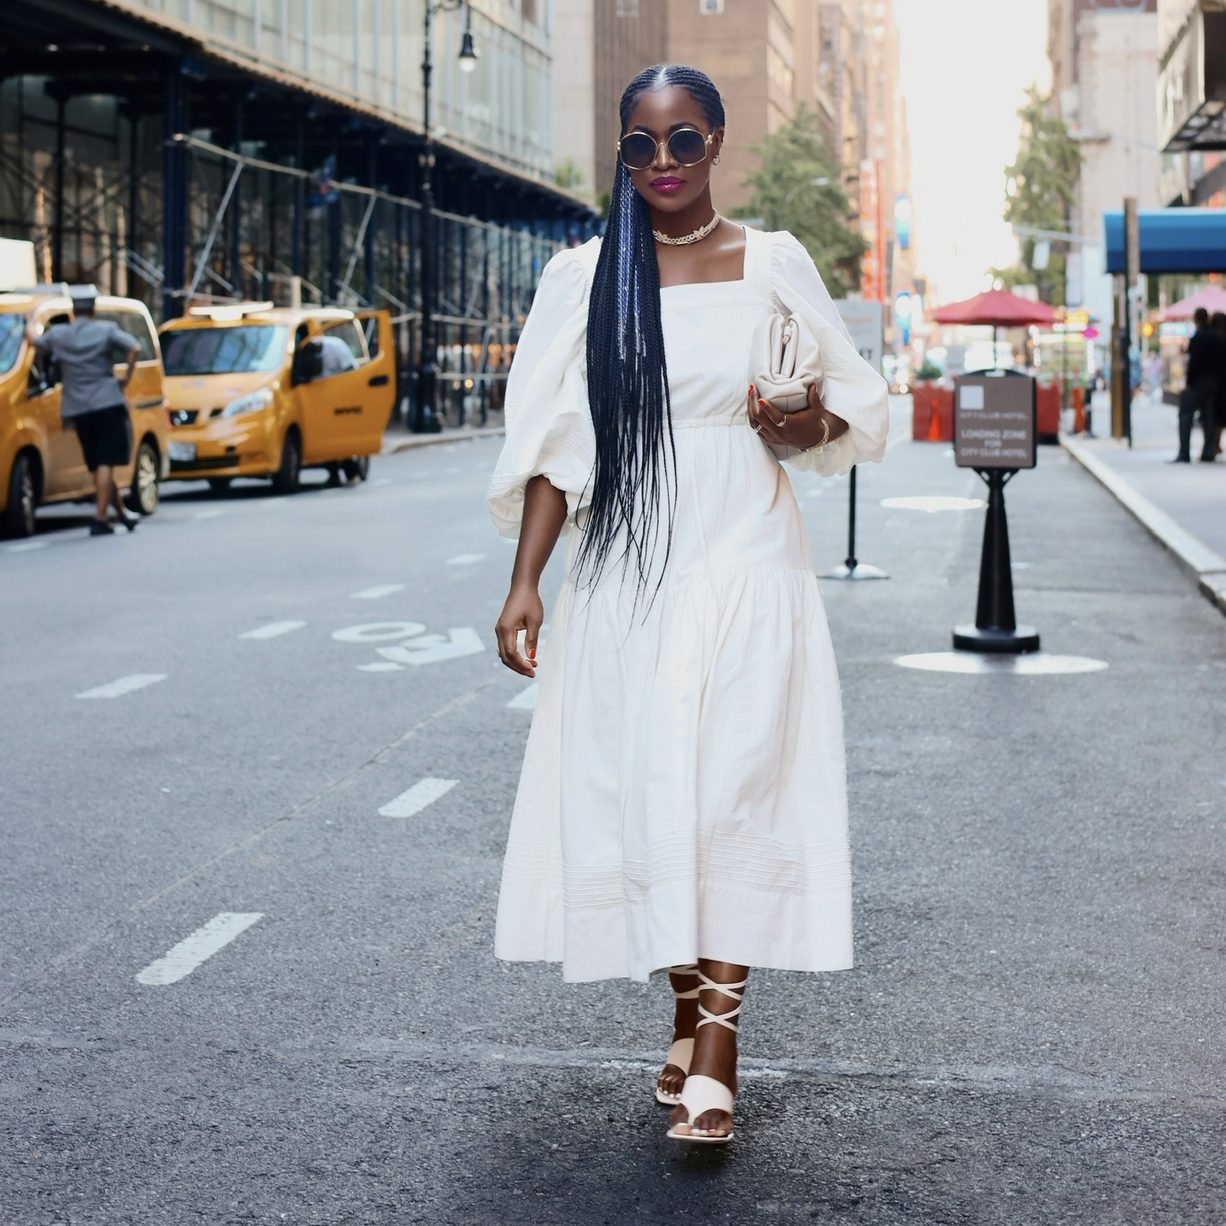 elfonnie shows her fashion style walking down New York City and talks about motherhood